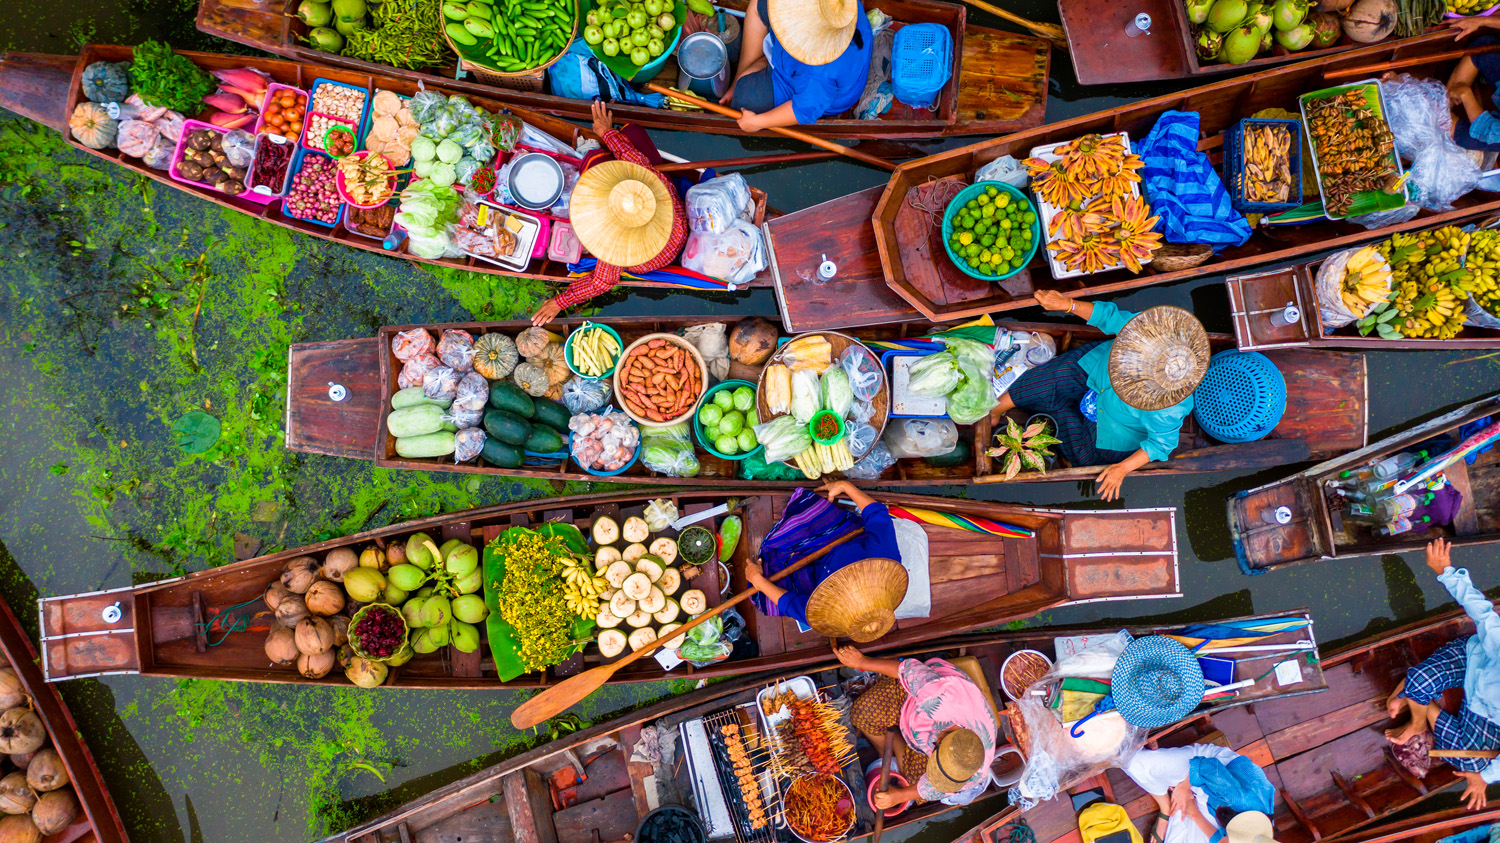 Aerial view famous floating market in Thailand, Damnoen Saduak floating market, Farmer go to sell organic products, fruits, vegetables and Thai cuisine, Tourists visiting by boat, Ratchaburi, Thailand food stories